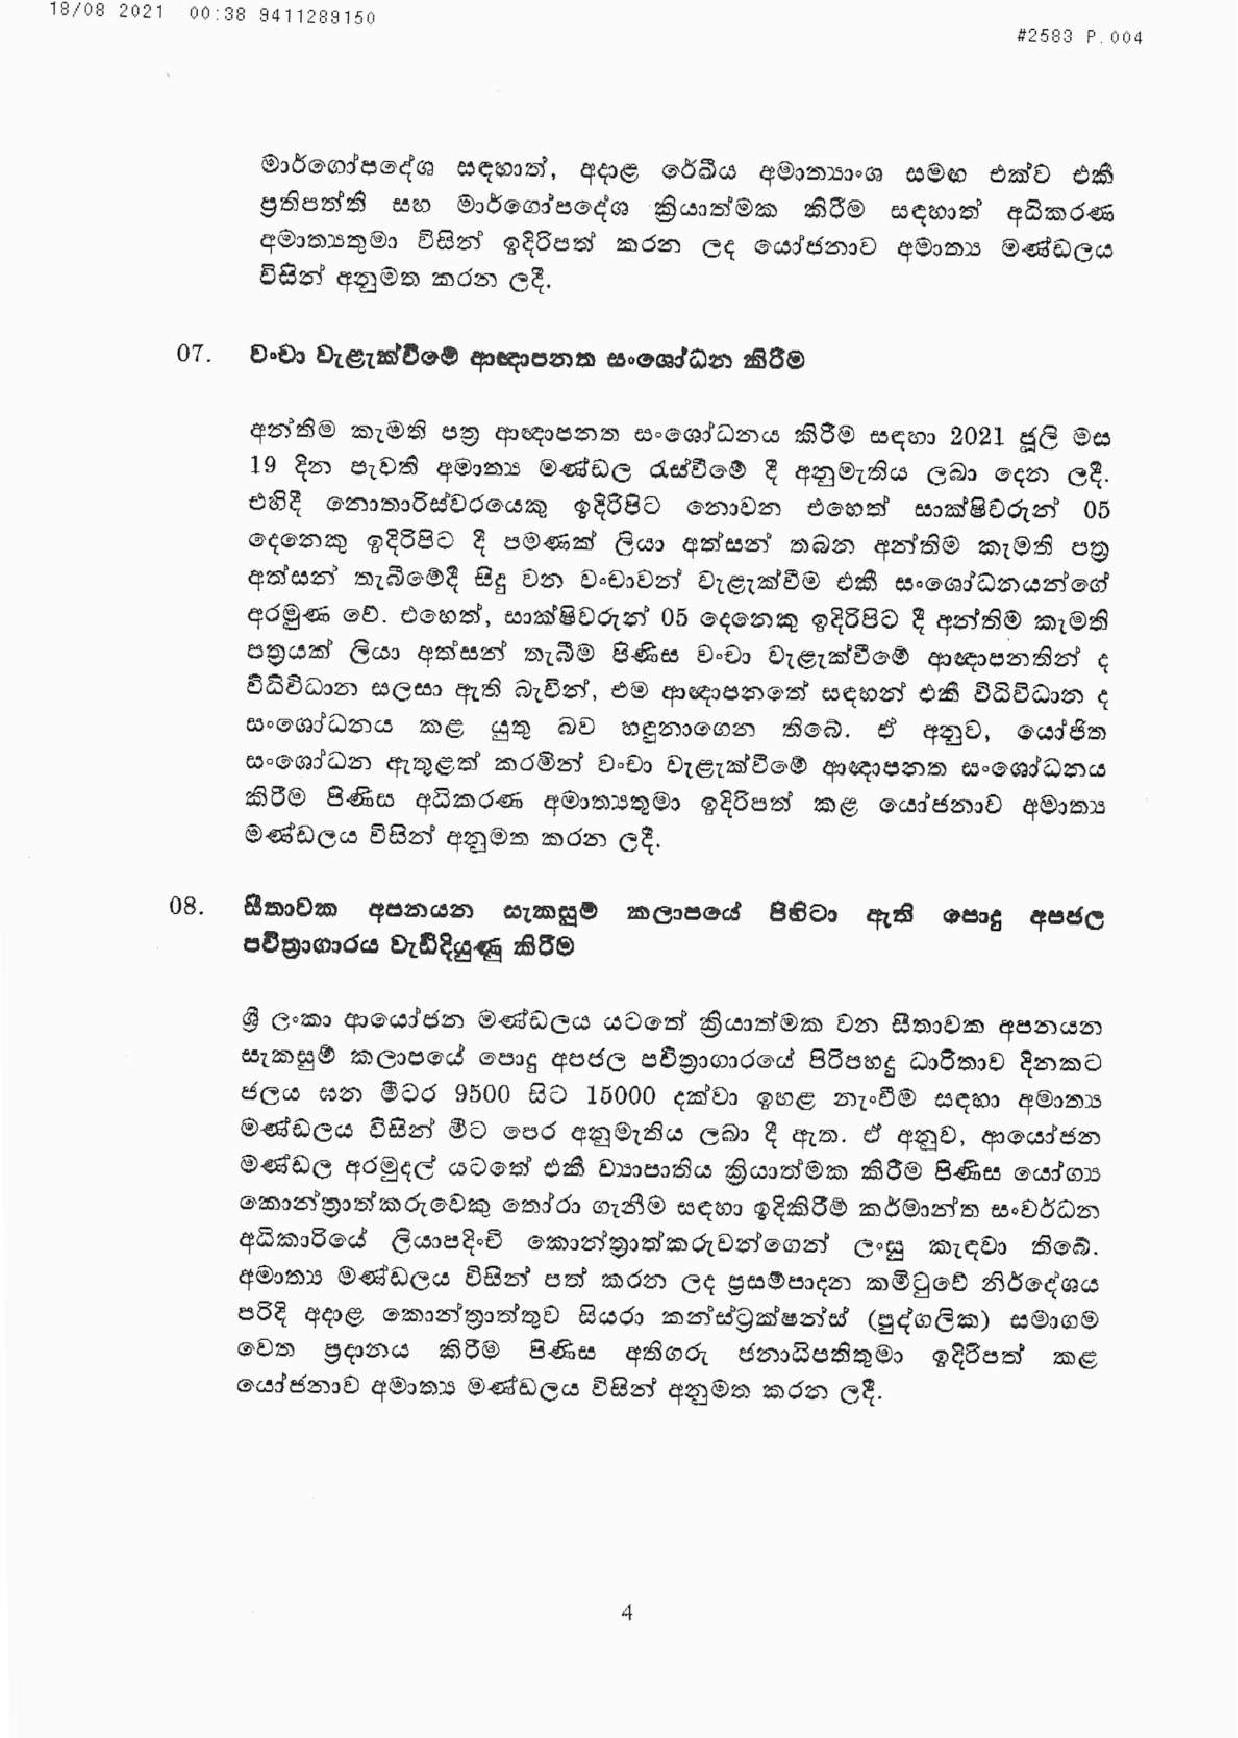 Cabinet Decisions on 17.08.2021 S page 004